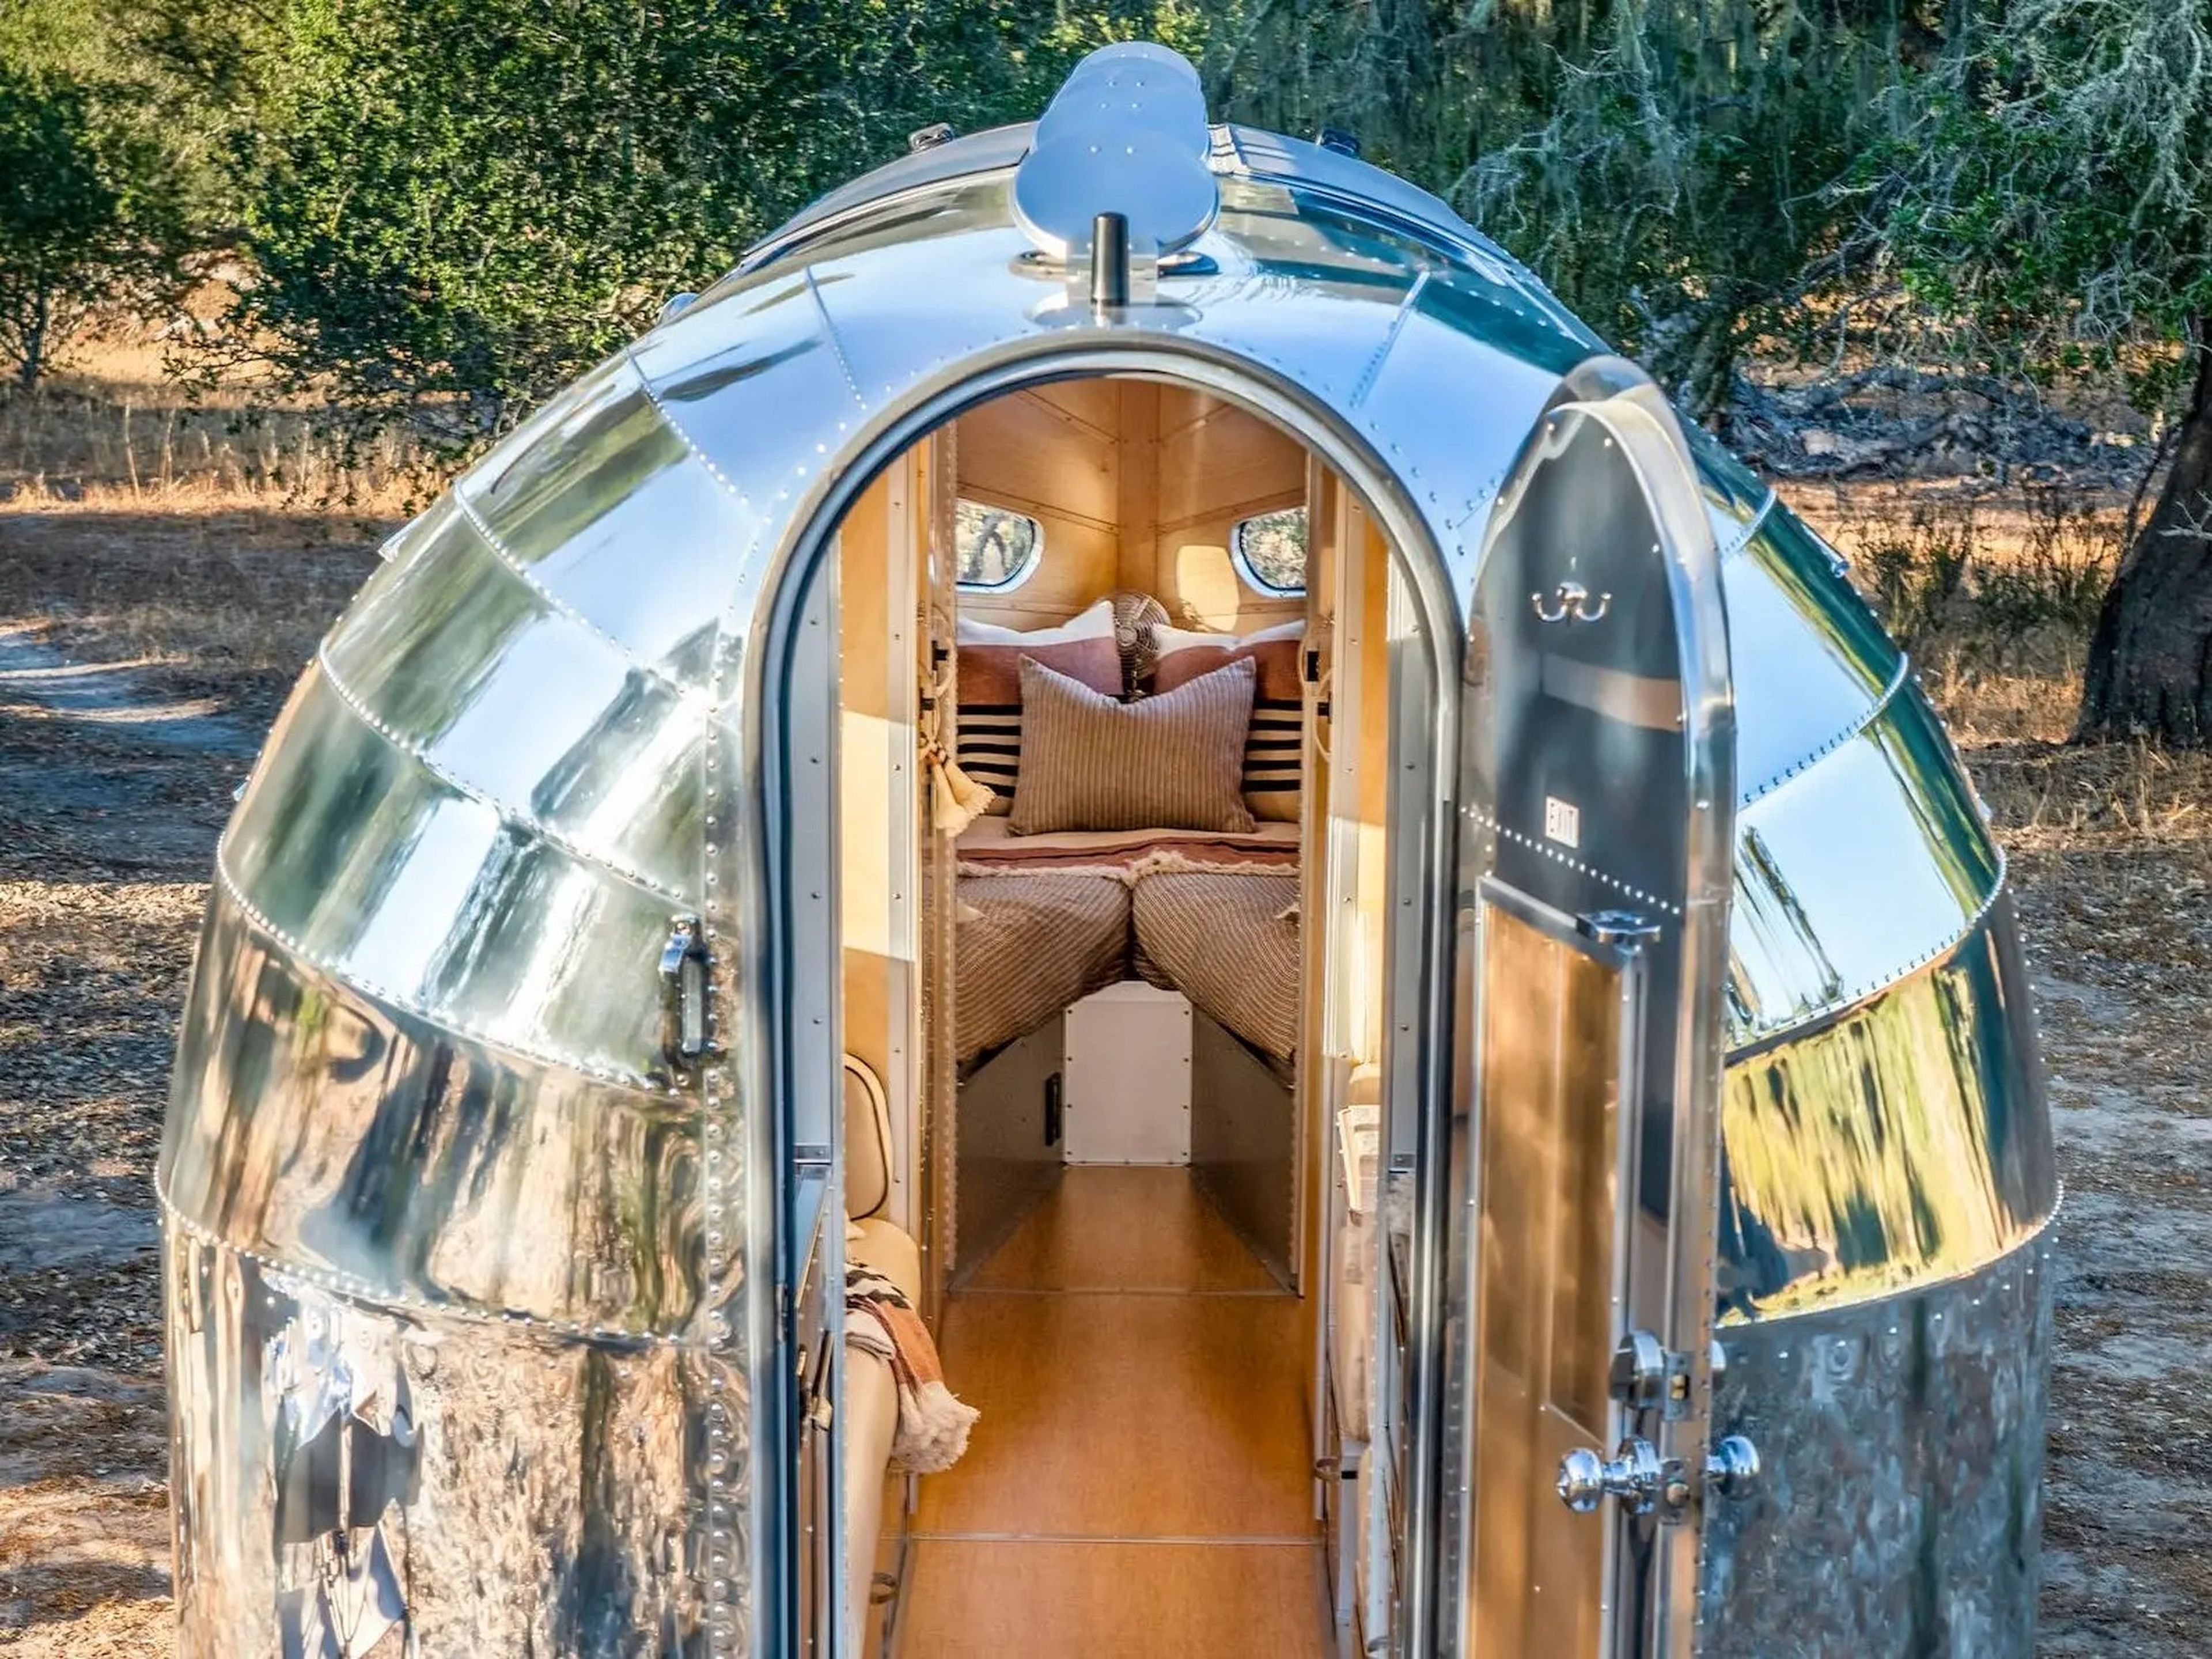 The Bowlus Volterra outside with the rear door open showing the bed.